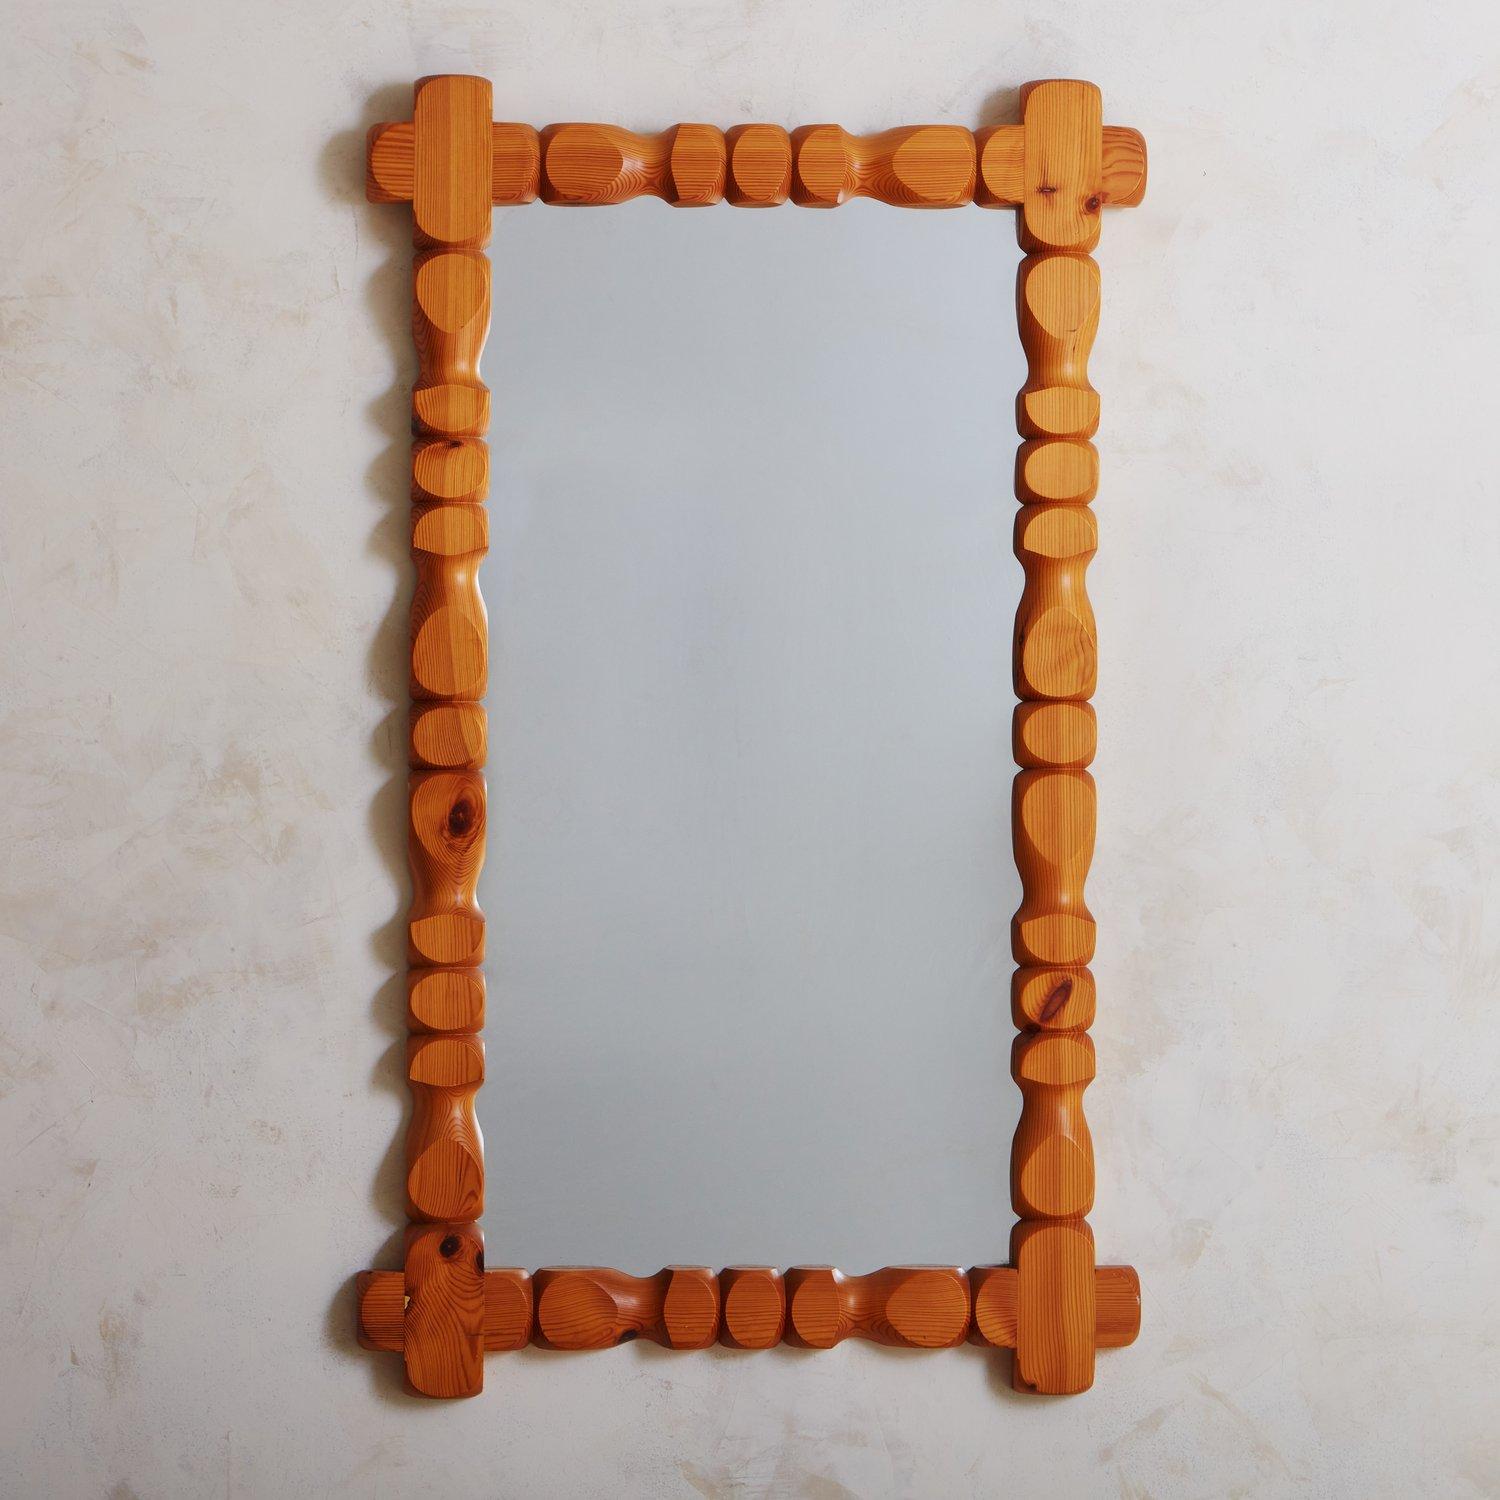 A brutalist 1970s Swedish mirror by Glas Mäster Markaryd featuring an intricate geometric frame hand carved from pine wood. We love the sculptural detailing and rich graining on this beauty. Retains ‘Glas Mäster Markaryd’ manufacturers label en